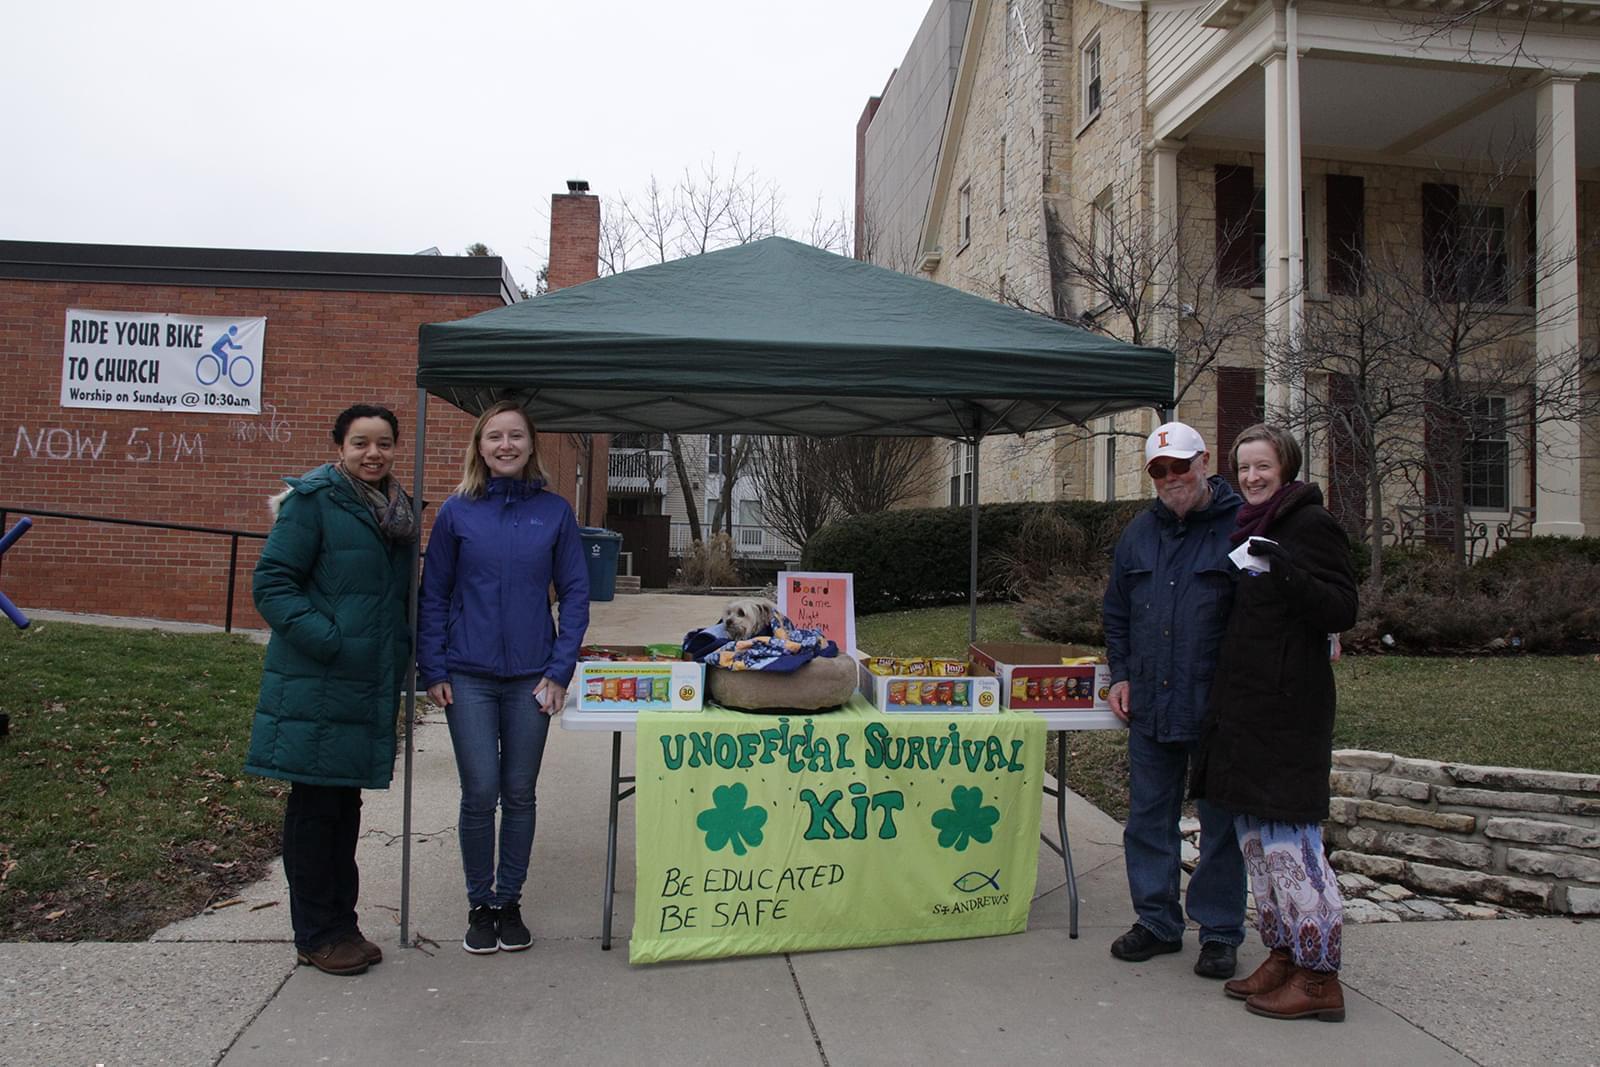 Volunteers hand out snacks and information about alternatives to 'Unofficial' outside St. Andrew's Lutheran Campus Center on Wright Street.